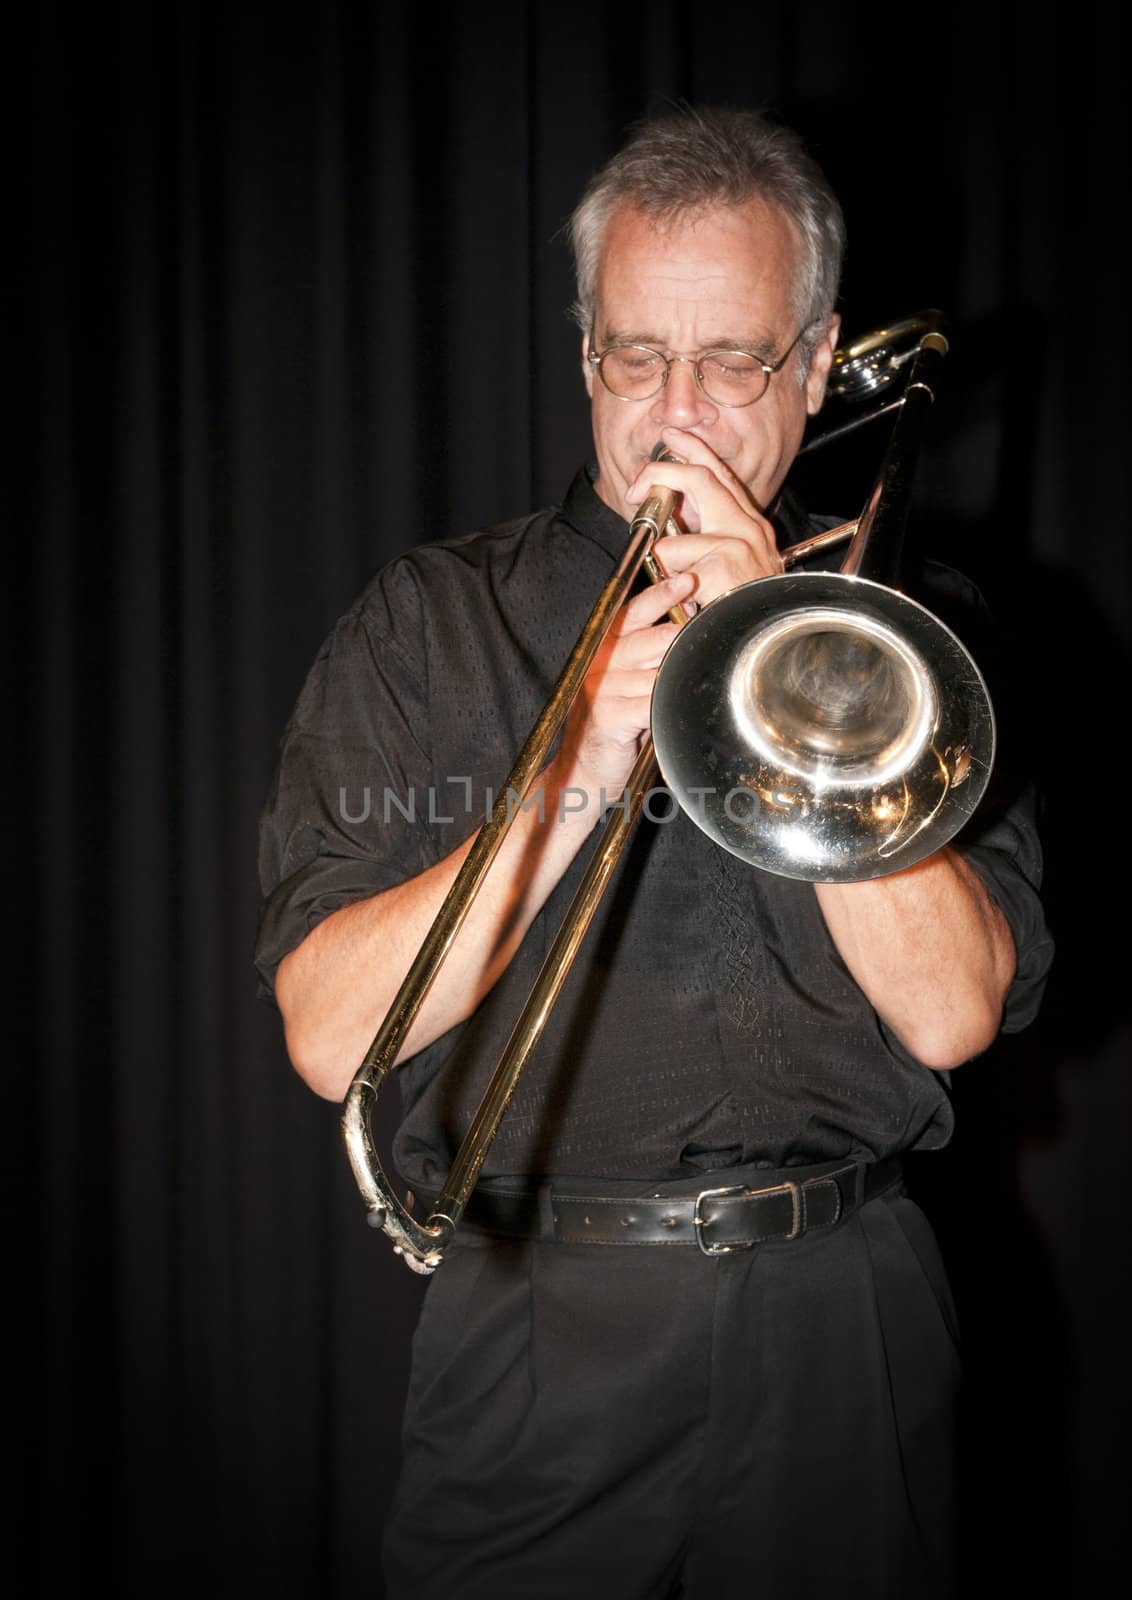 Trombonist Dave Arthur playing at the Art Centre in Ottawa, Canada.